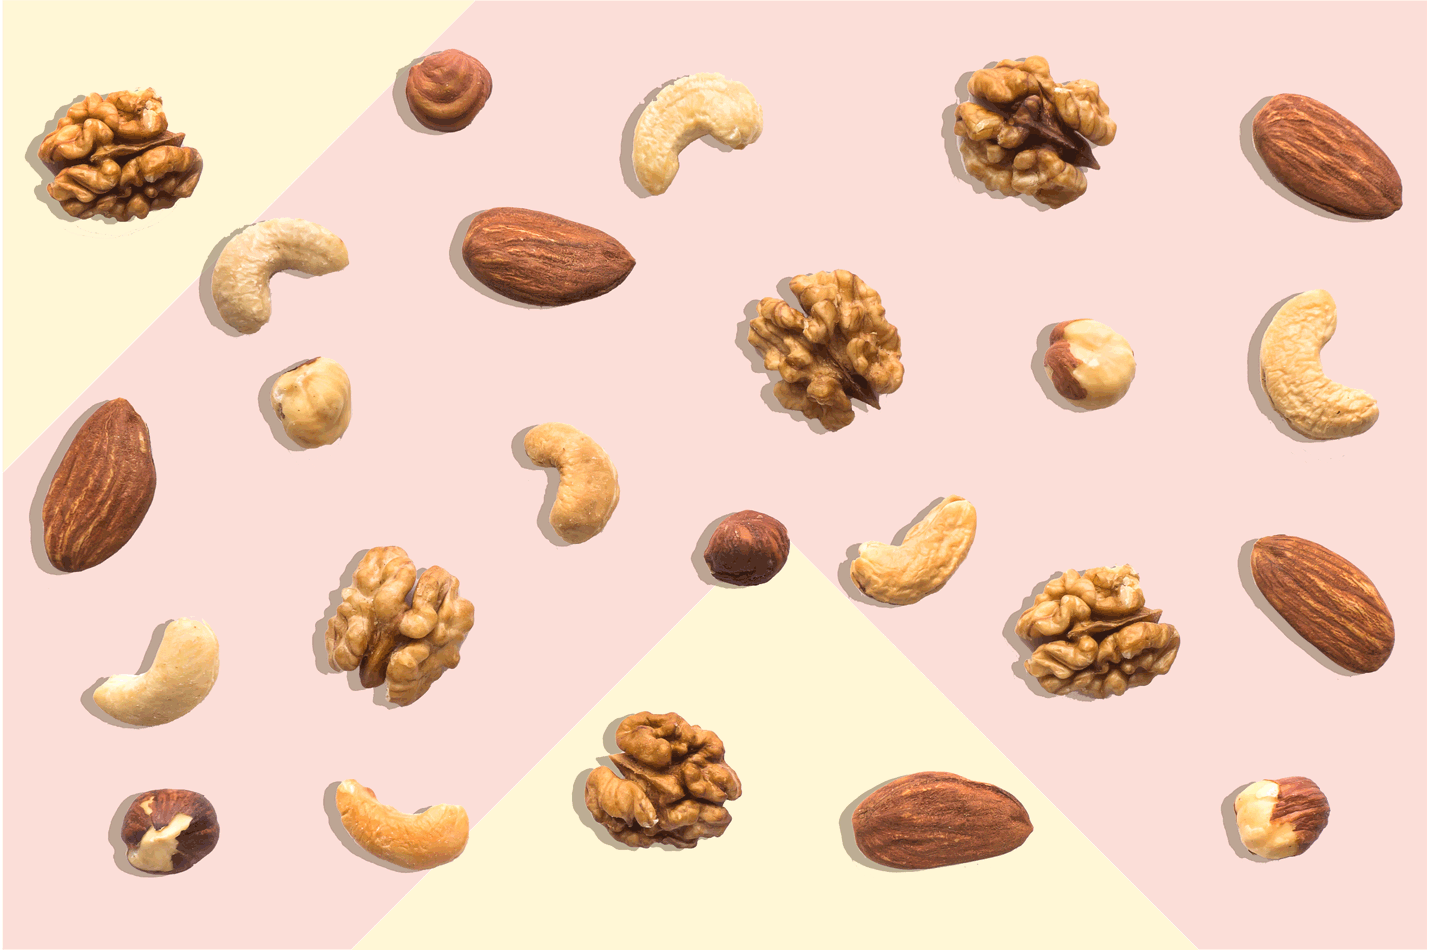 All Nuts Are Good for You, But These 8 Are the Healthiest